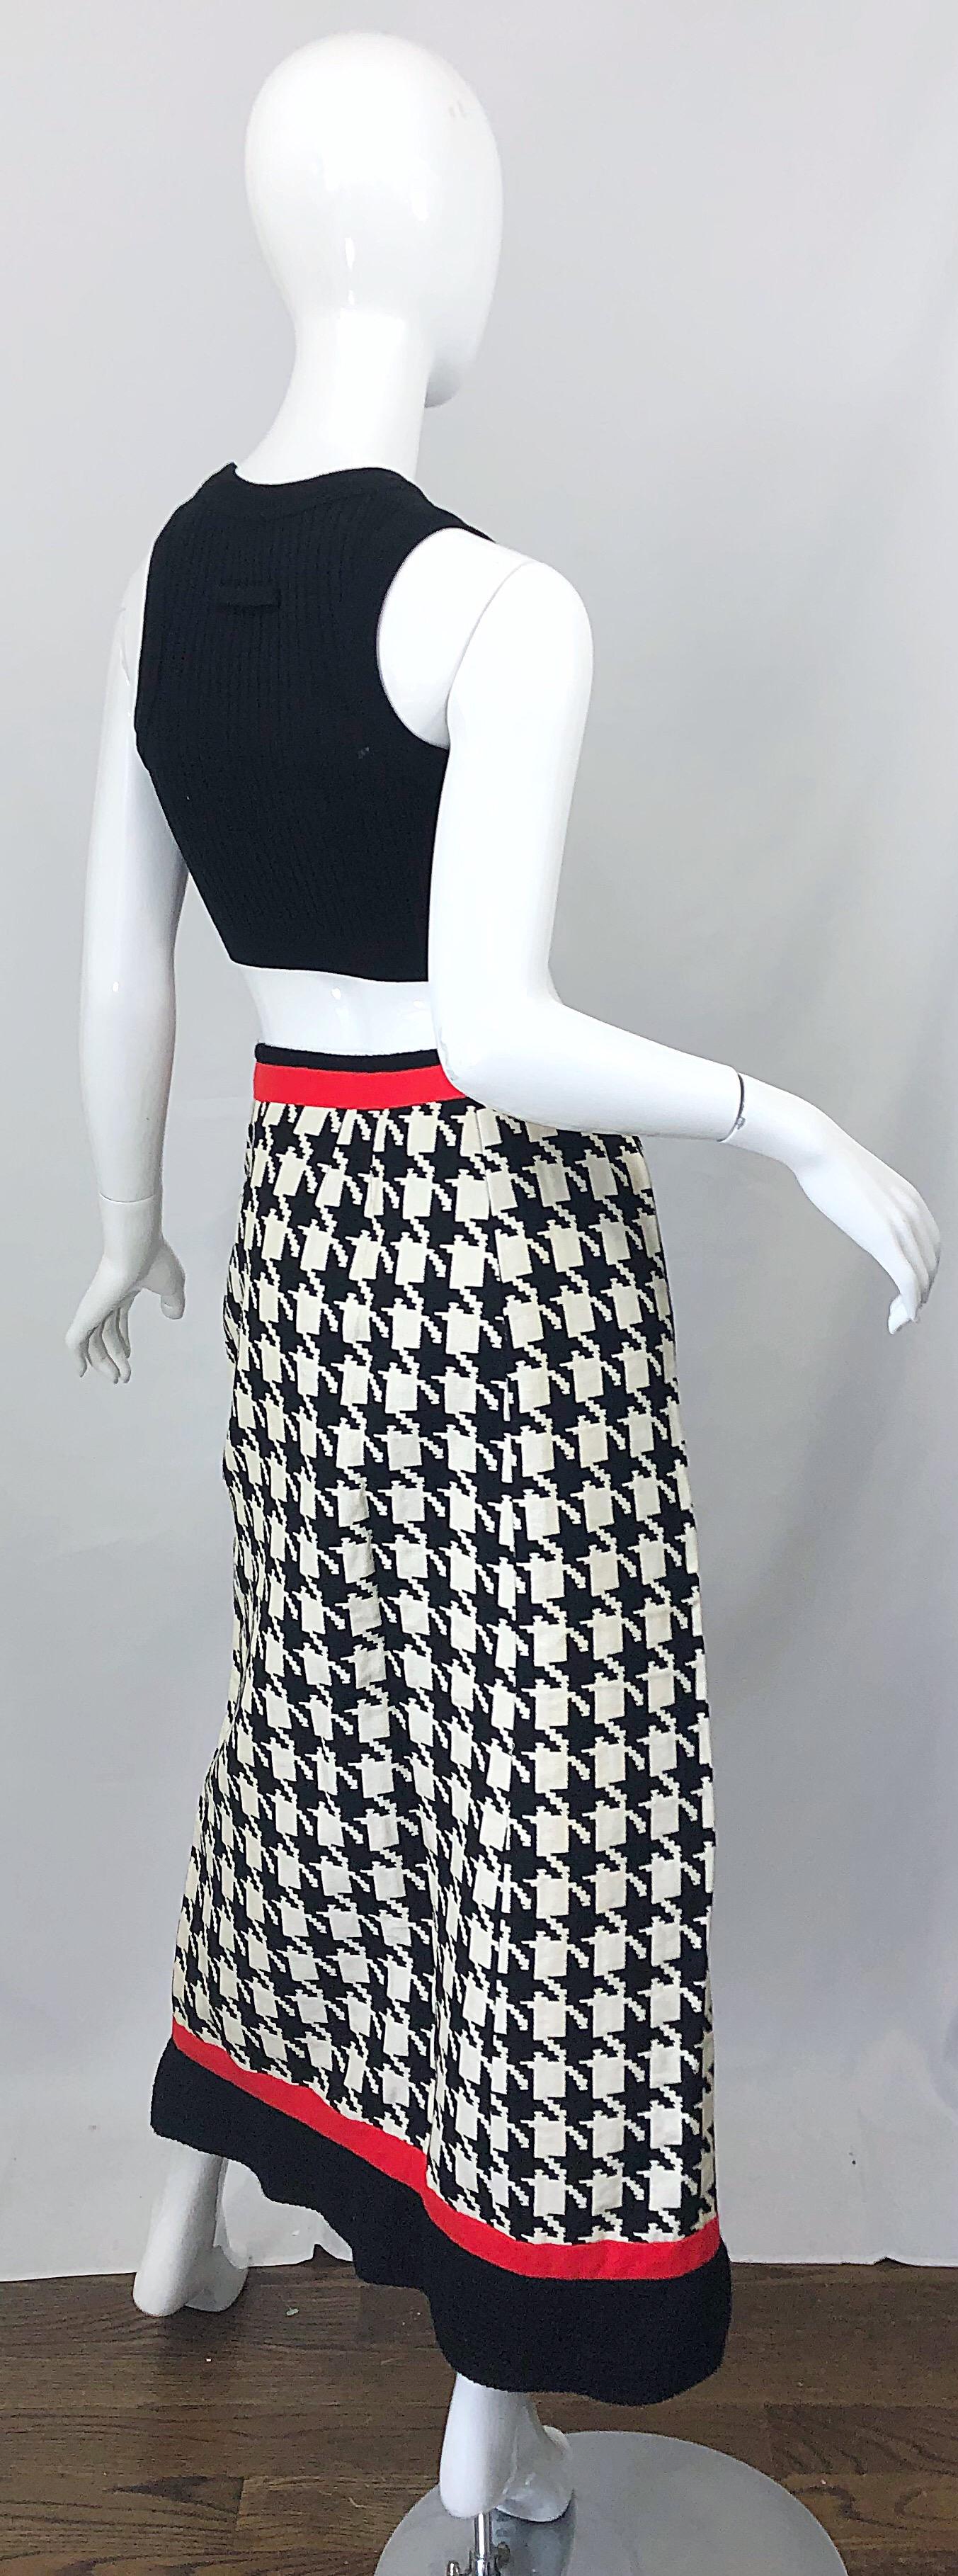 Noir 1970 Black and White and Red Houndstooth Striped Vintage 70s Maxi Skirt en vente